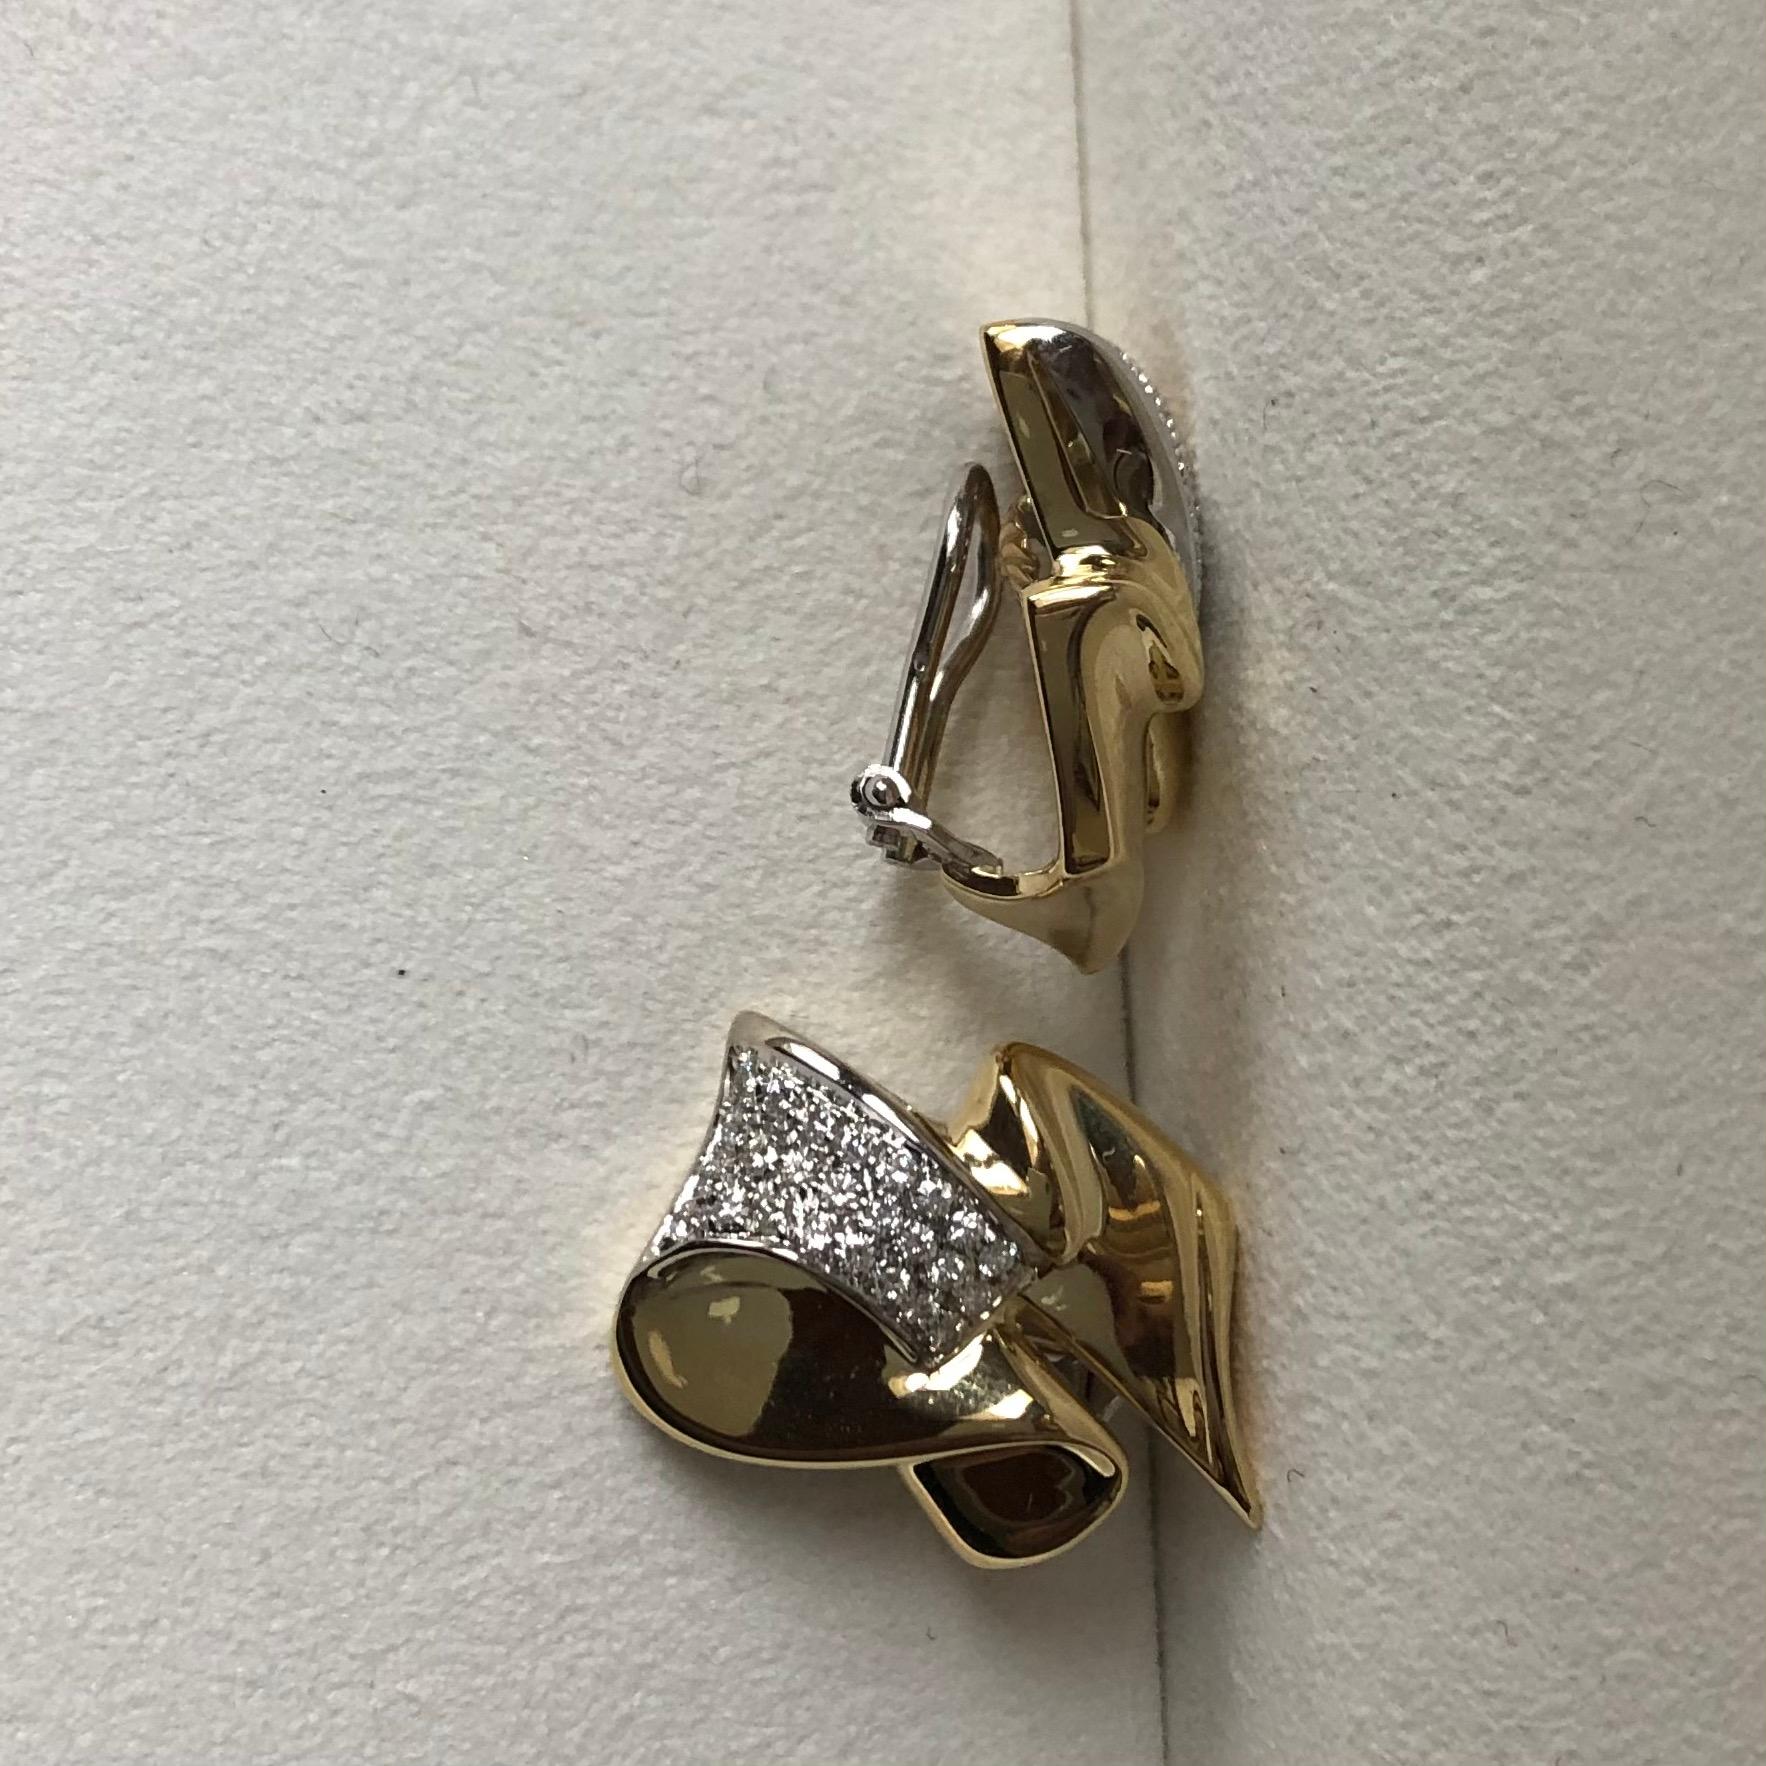 A 1.00 carat diamonds on 18k yellow and white gold clip earrings. 
An everyday pair of earrings with clips, although easy to adjust for pierced ears.

Diamonds are beautifully pavé set in white gold in order to enhance their brilliancy.

50